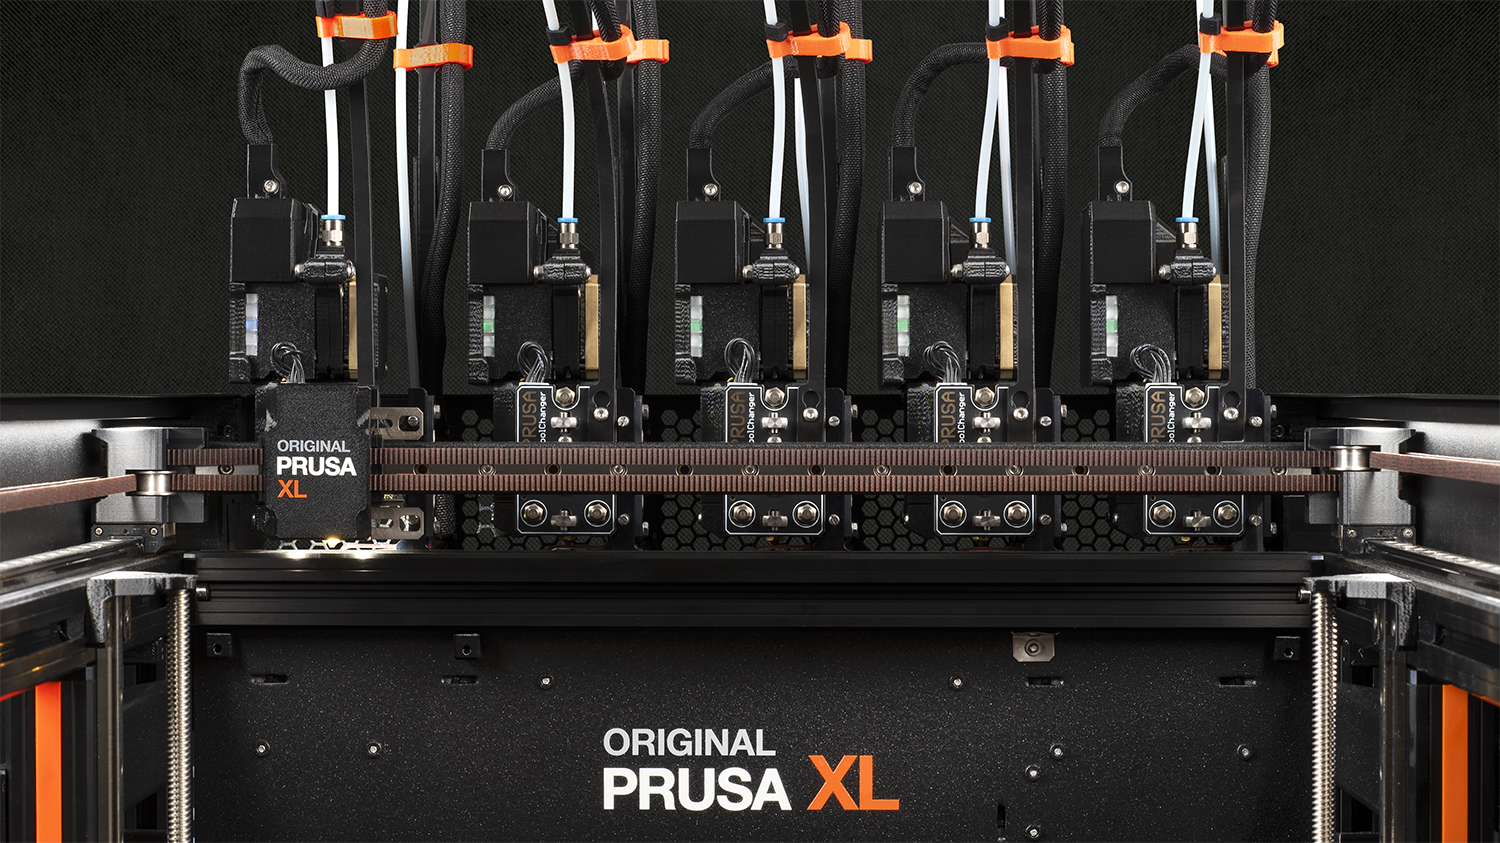 Five Prusa XL Nextruders next to each other on the printer